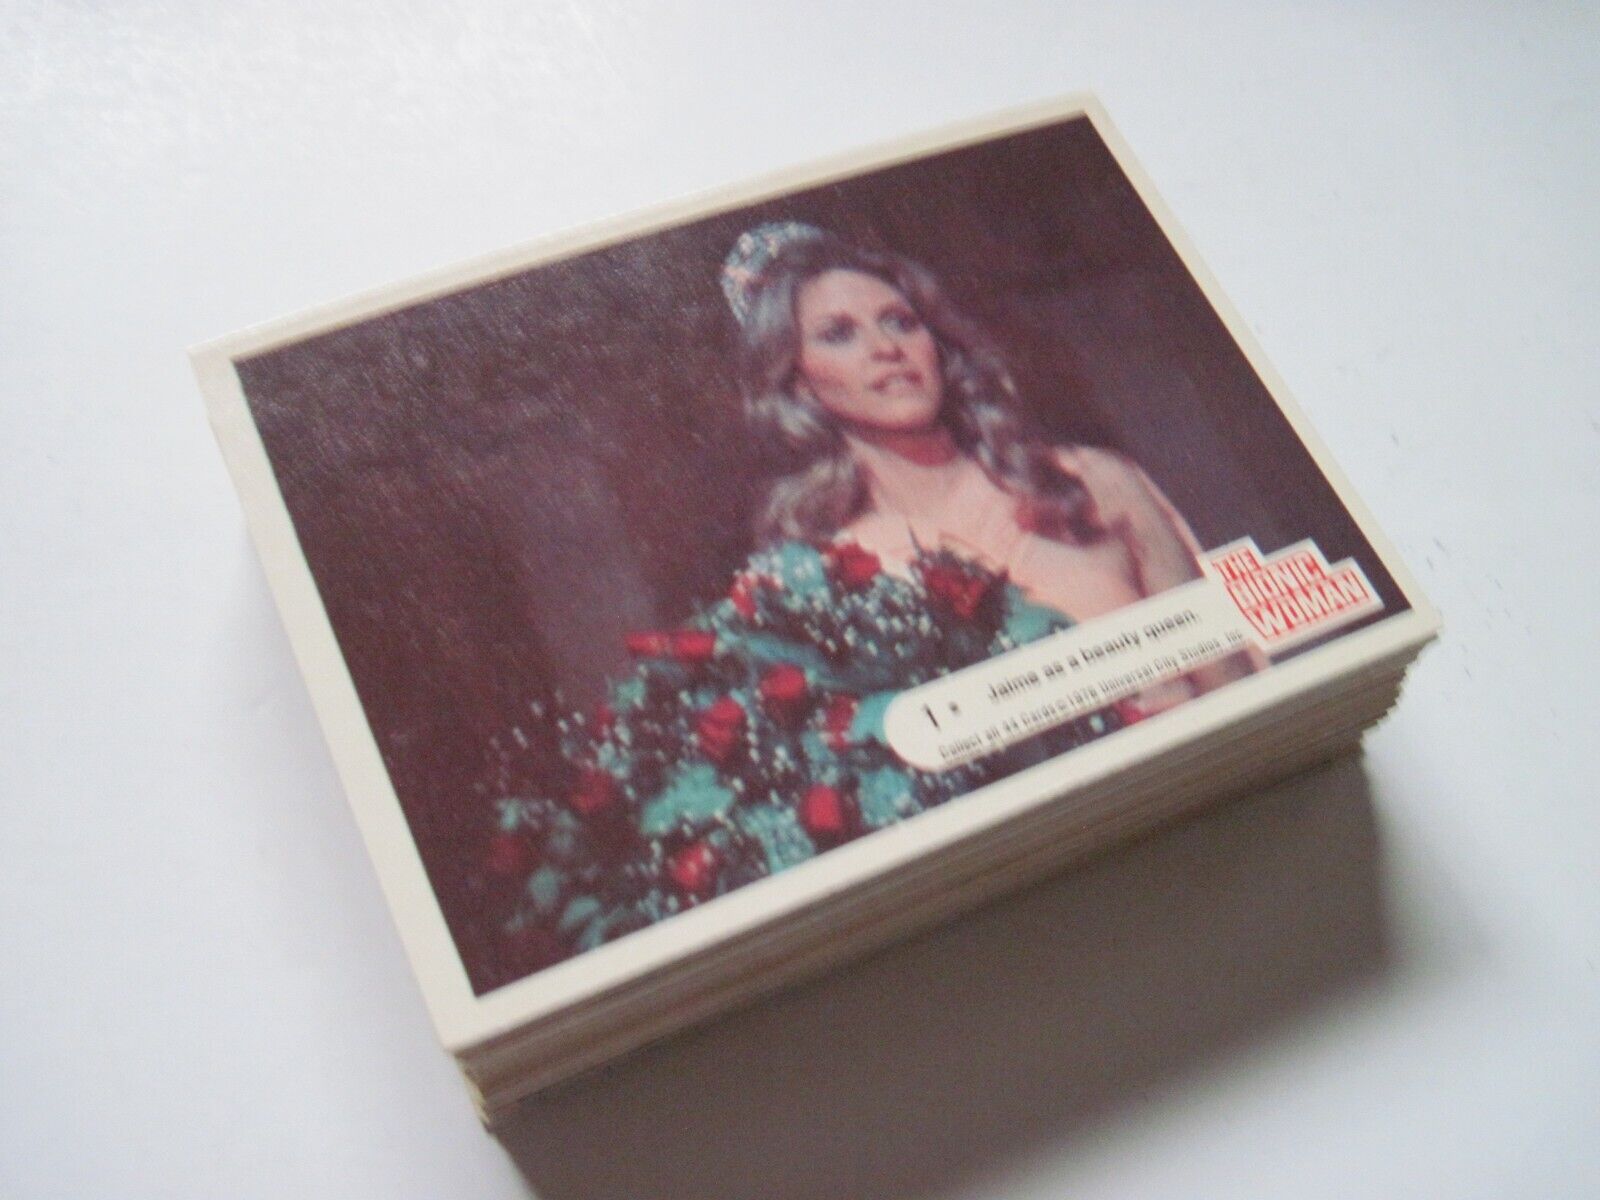 1976 Donruss The Bionic Woman 44 Card Complete Set Jamie Summers Lindsay Wagner